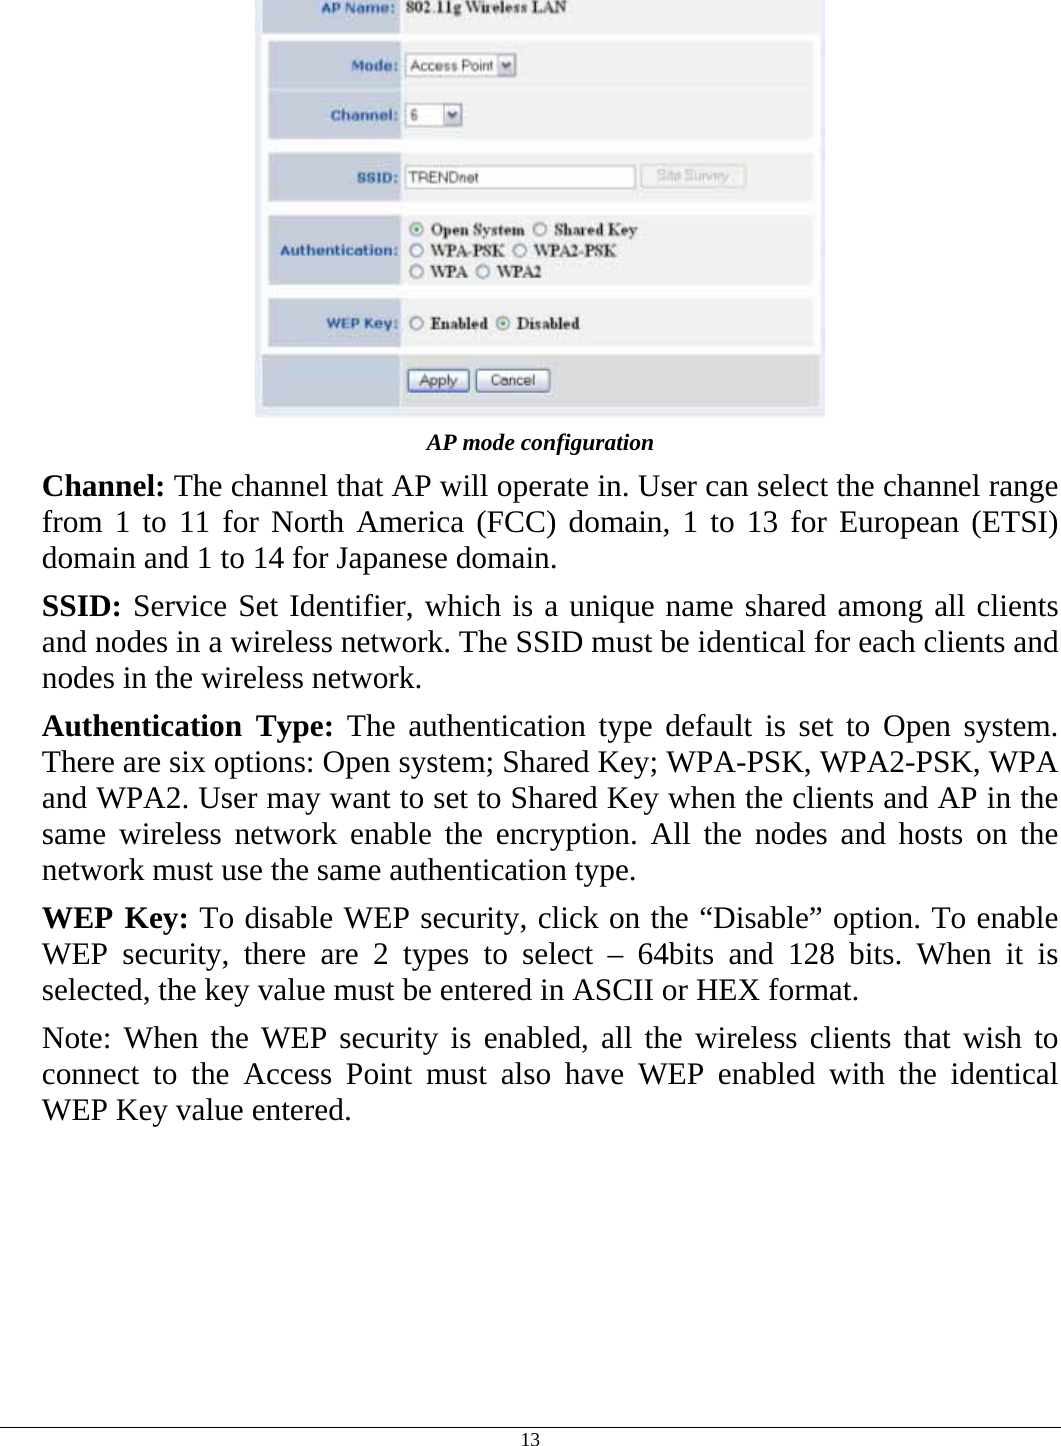  13  AP mode configuration Channel: The channel that AP will operate in. User can select the channel range from 1 to 11 for North America (FCC) domain, 1 to 13 for European (ETSI) domain and 1 to 14 for Japanese domain. SSID: Service Set Identifier, which is a unique name shared among all clients and nodes in a wireless network. The SSID must be identical for each clients and nodes in the wireless network. Authentication Type: The authentication type default is set to Open system.  There are six options: Open system; Shared Key; WPA-PSK, WPA2-PSK, WPA and WPA2. User may want to set to Shared Key when the clients and AP in the same wireless network enable the encryption. All the nodes and hosts on the network must use the same authentication type.   WEP Key: To disable WEP security, click on the “Disable” option. To enable WEP security, there are 2 types to select – 64bits and 128 bits. When it is selected, the key value must be entered in ASCII or HEX format. Note: When the WEP security is enabled, all the wireless clients that wish to connect to the Access Point must also have WEP enabled with the identical WEP Key value entered. 